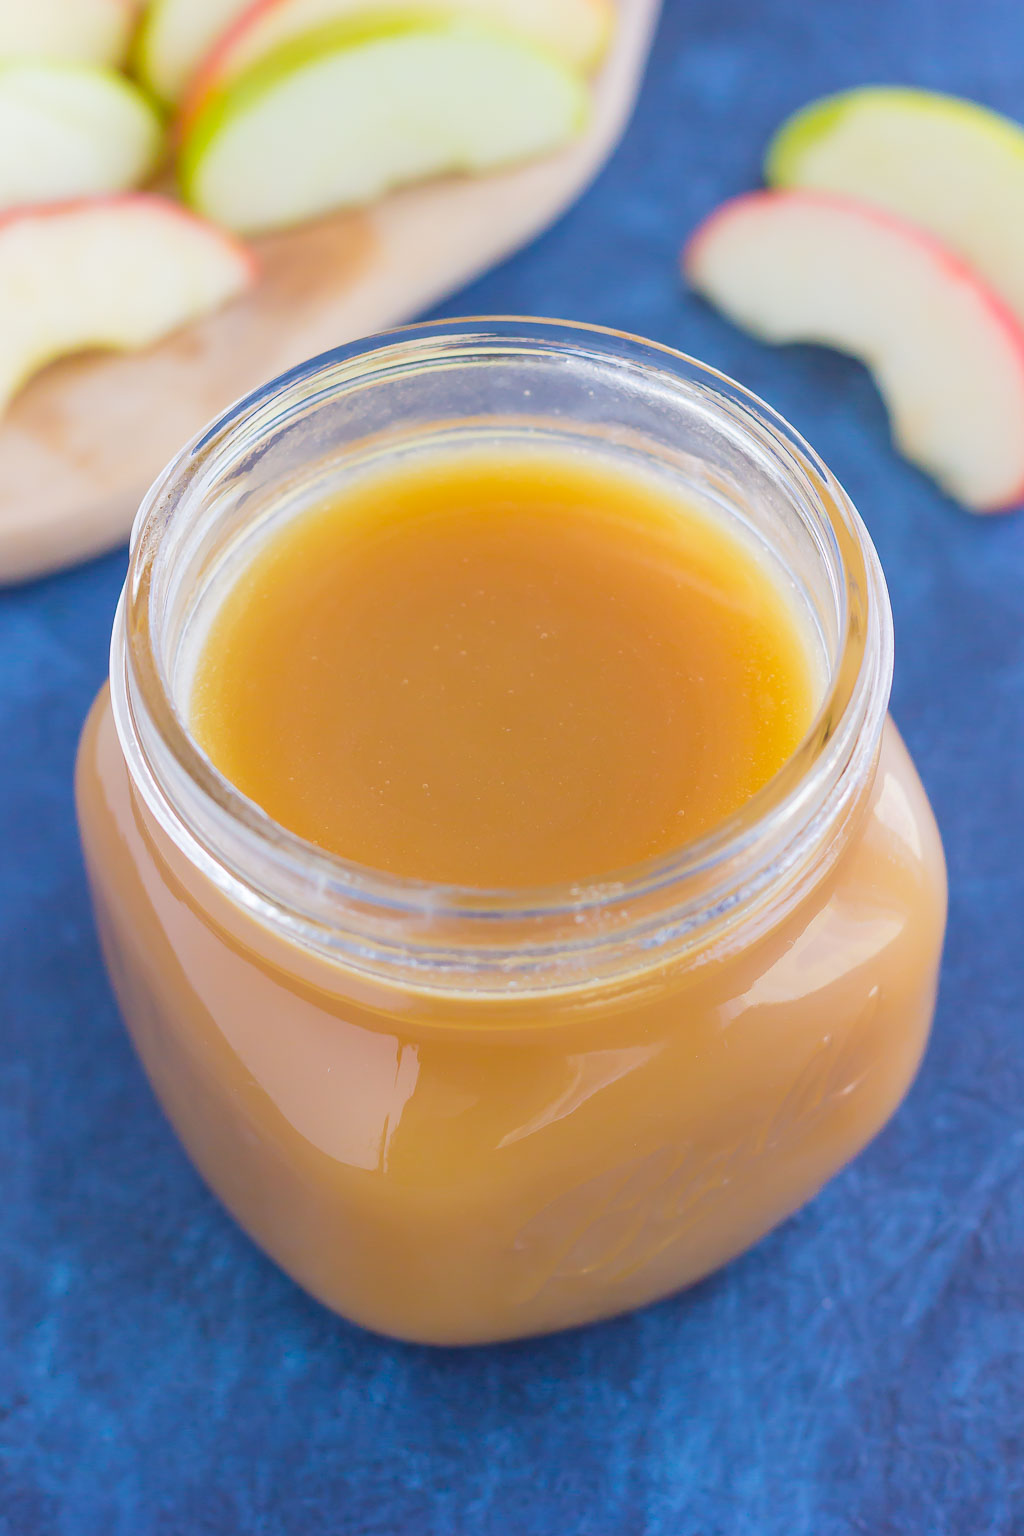 Sweet, smooth, and full of flavor, this Salted Caramel Sauce is just itching to be poured over ice cream, drizzled over pancakes, or eaten with spoon! #caramel #caramelsauce #caramelrecipe #saltedcaramelsauce #saltedcaramelrecipe #saltedcaramel #fallrecipe #falldessert #icecreamtopping 